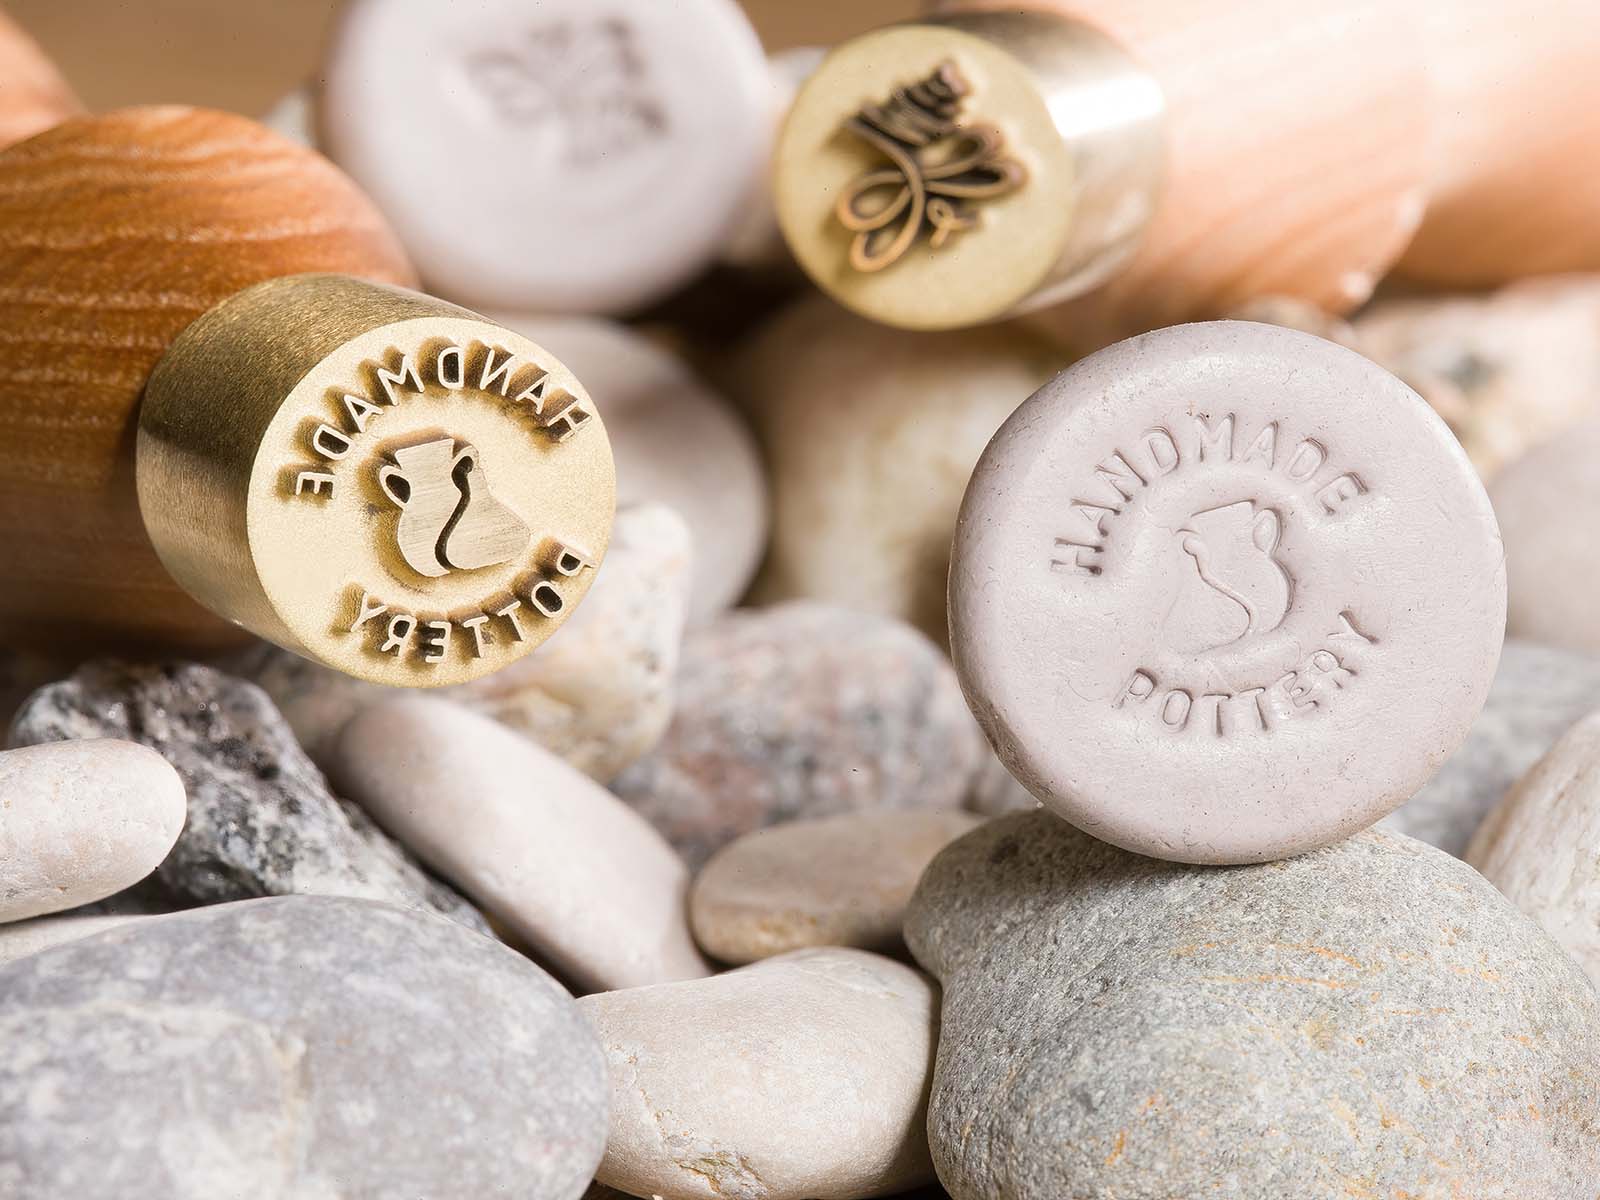 clay stamps offer the opportunity to incorporate unique touches, making each piece truly one-of-a-kind. They serve as a fantastic clay tool for achieving intricate textures and designs in pottery artistry.